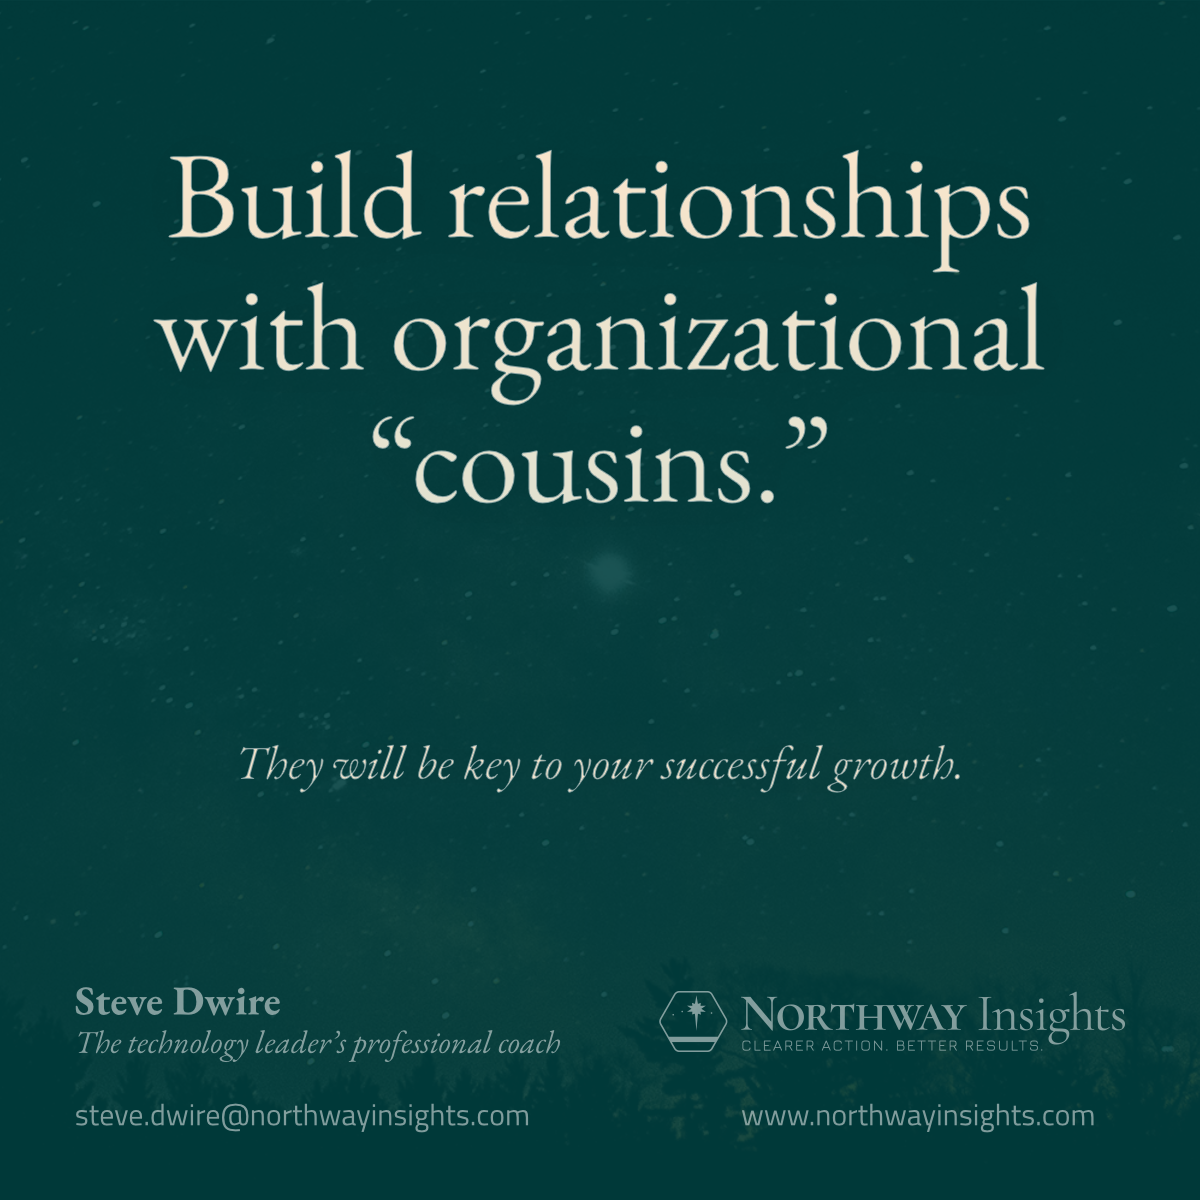 Build relationships with organizational “cousins.”